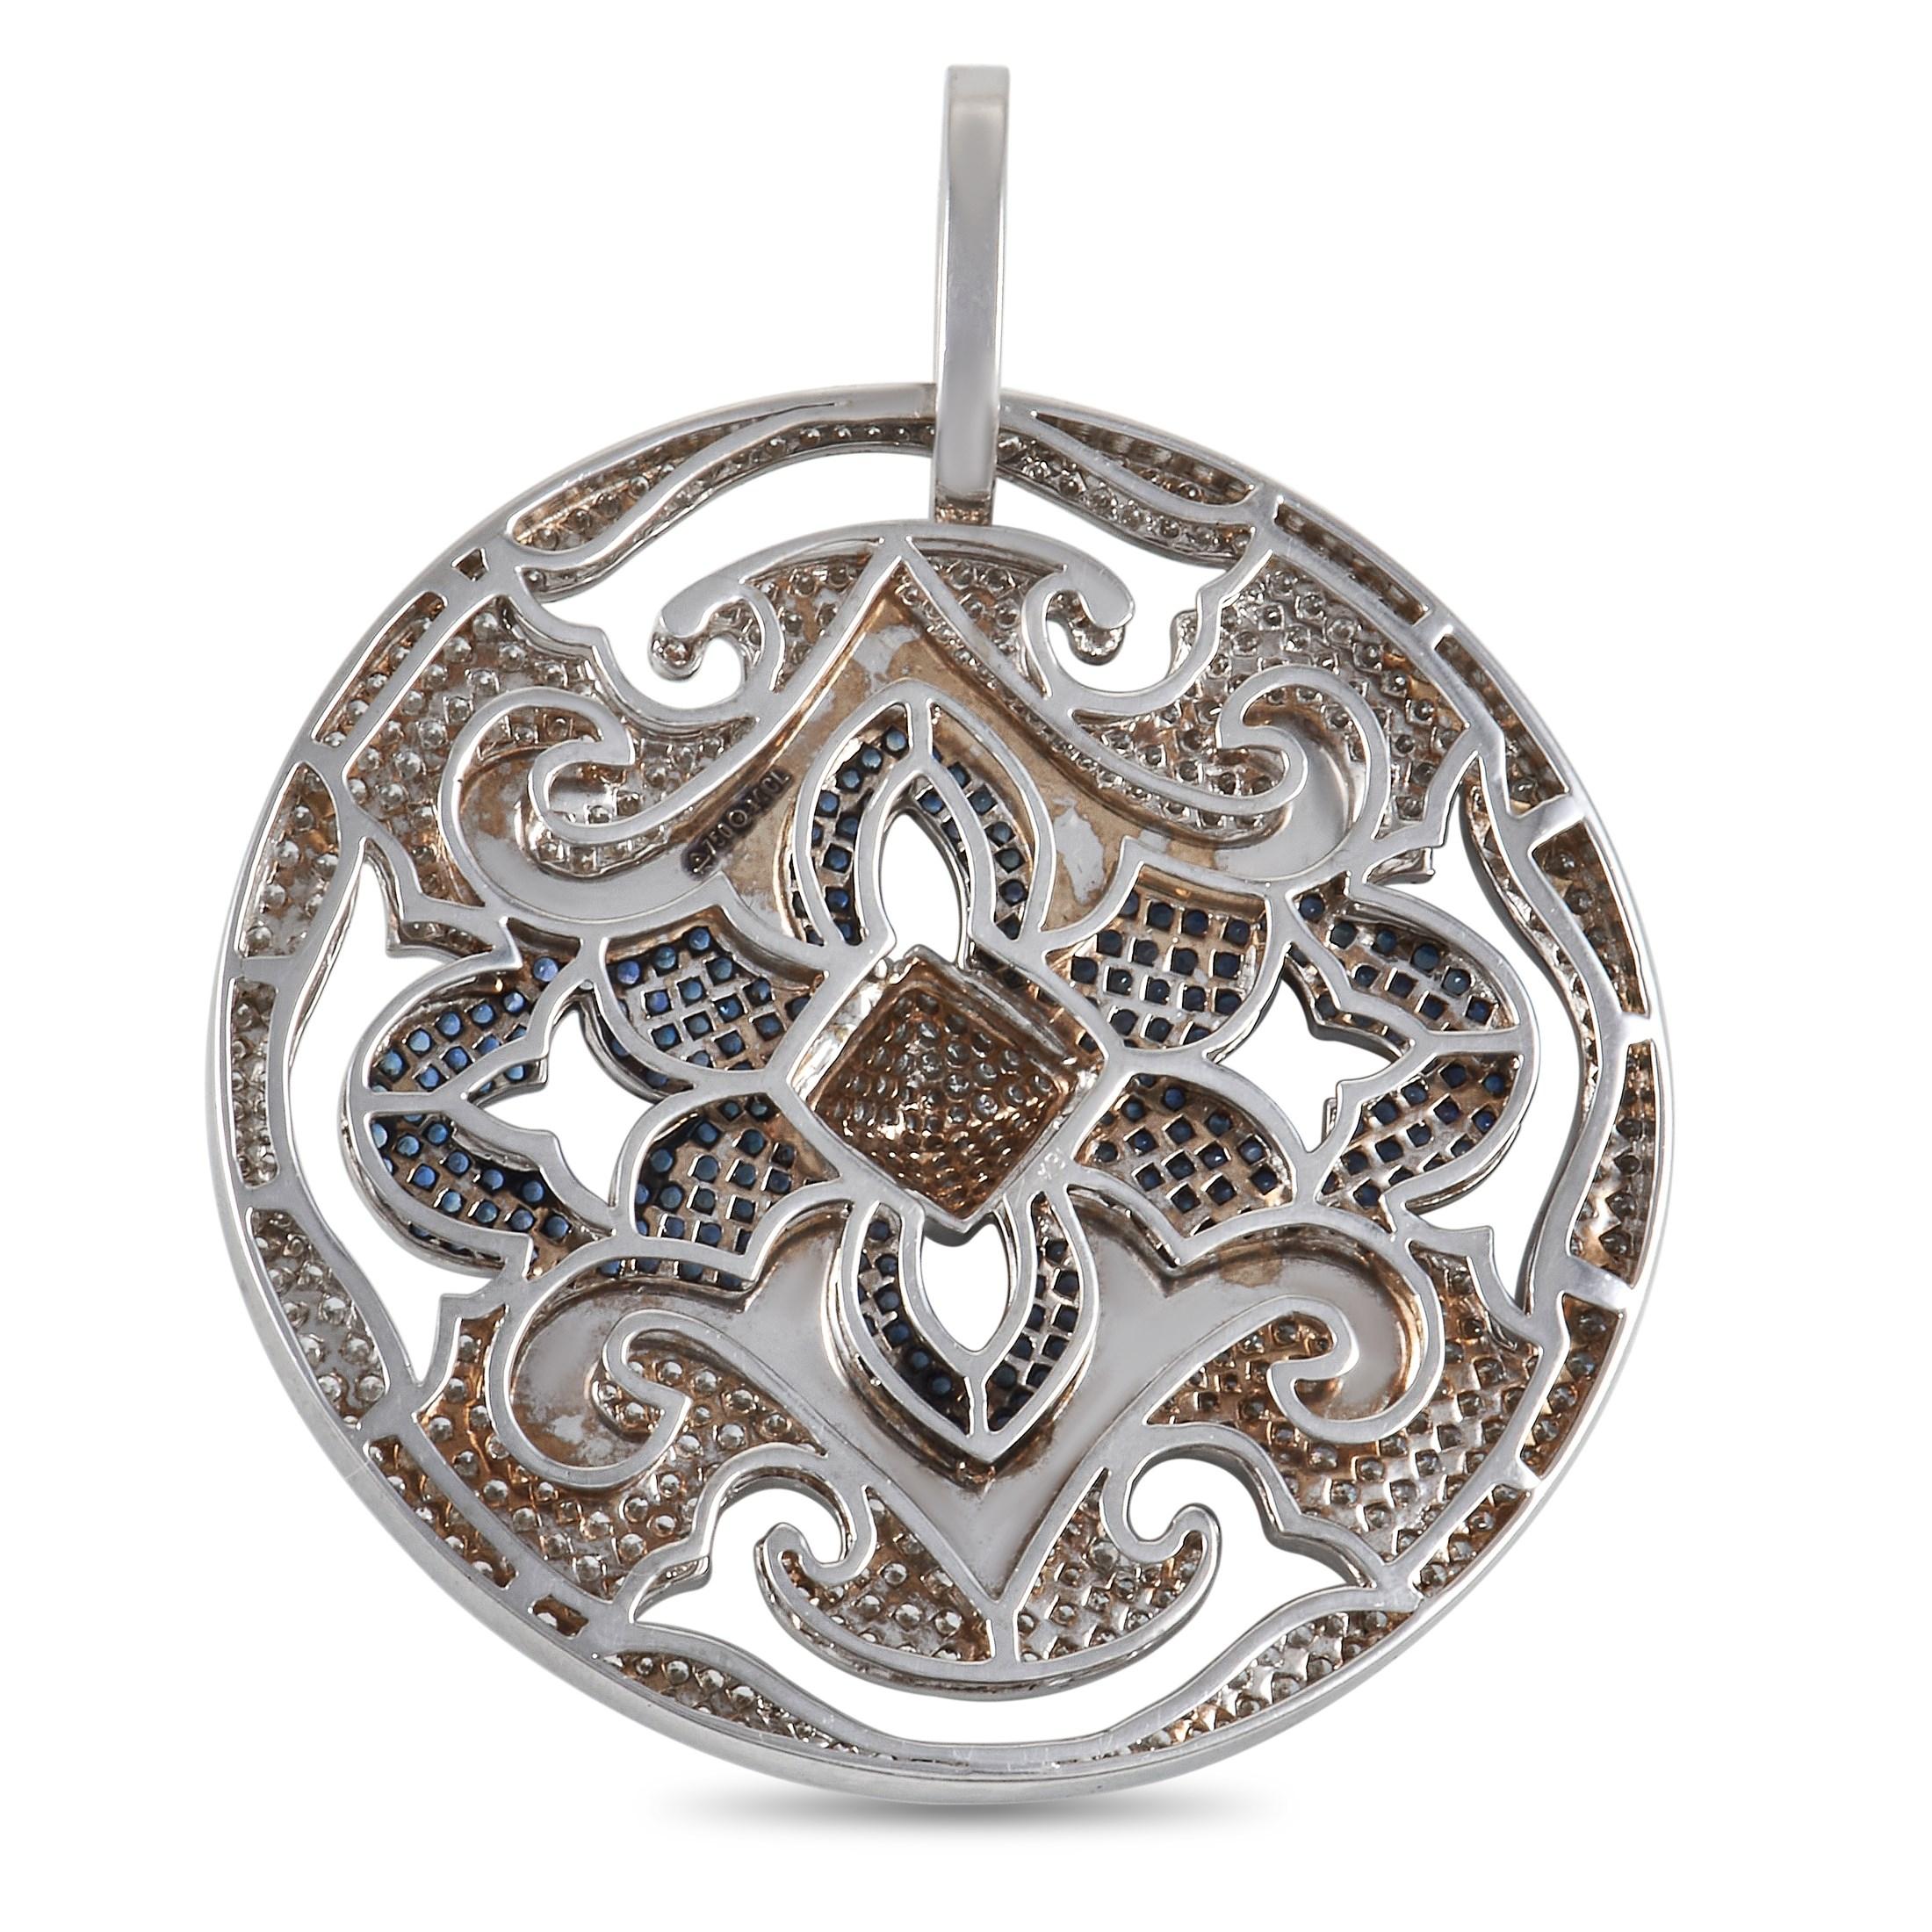 Designed with a fairytale charm, this diamond and sapphire pendant will bring a hint of enchanting elegance to your looks. This 3x2.45-inch round pendant features a flat disc profile with ornamental flourish design cut-outs. The pendant comes